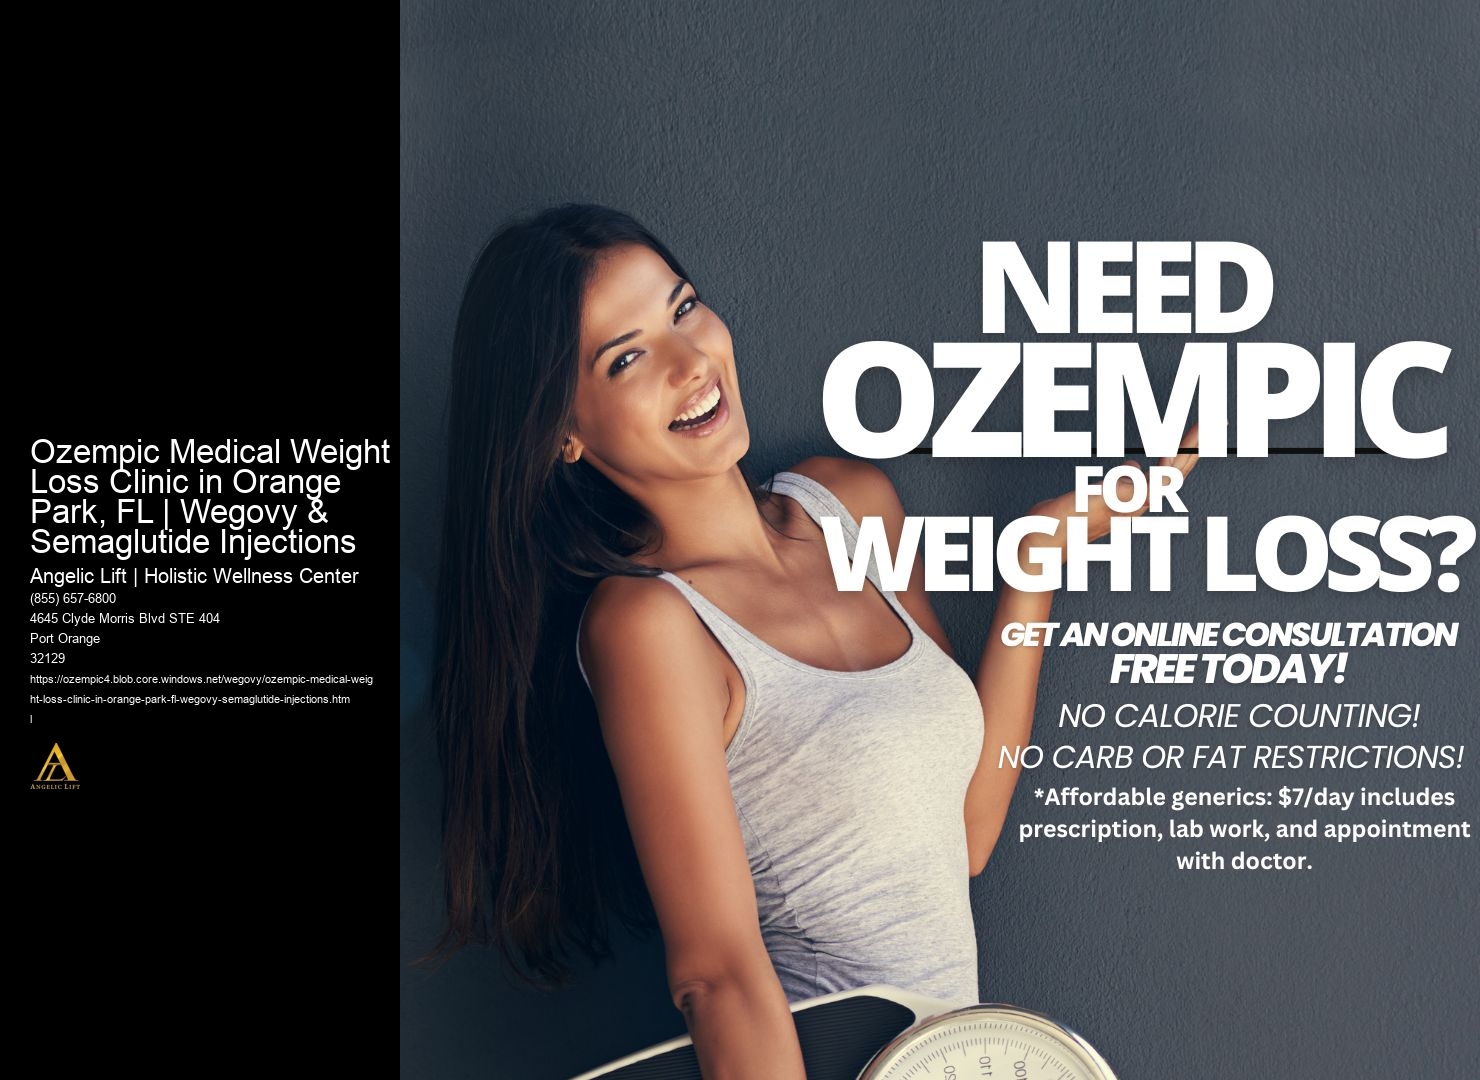 Ozempic Medical Weight Loss Clinic in Orange Park, FL | Wegovy & Semaglutide Injections